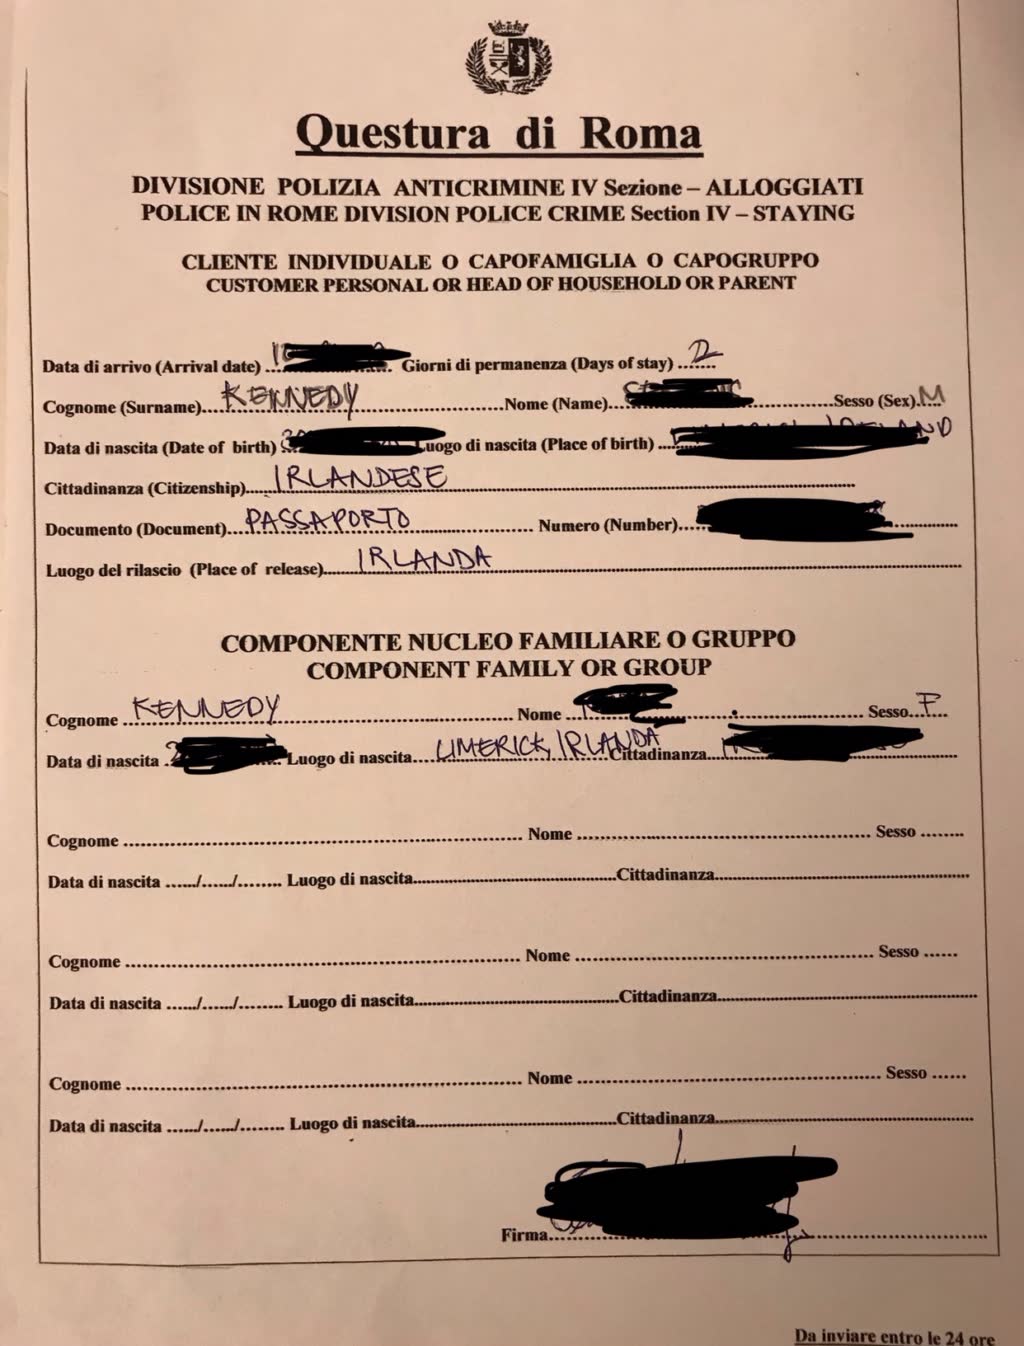 form with personal information for hotel check in in Rome